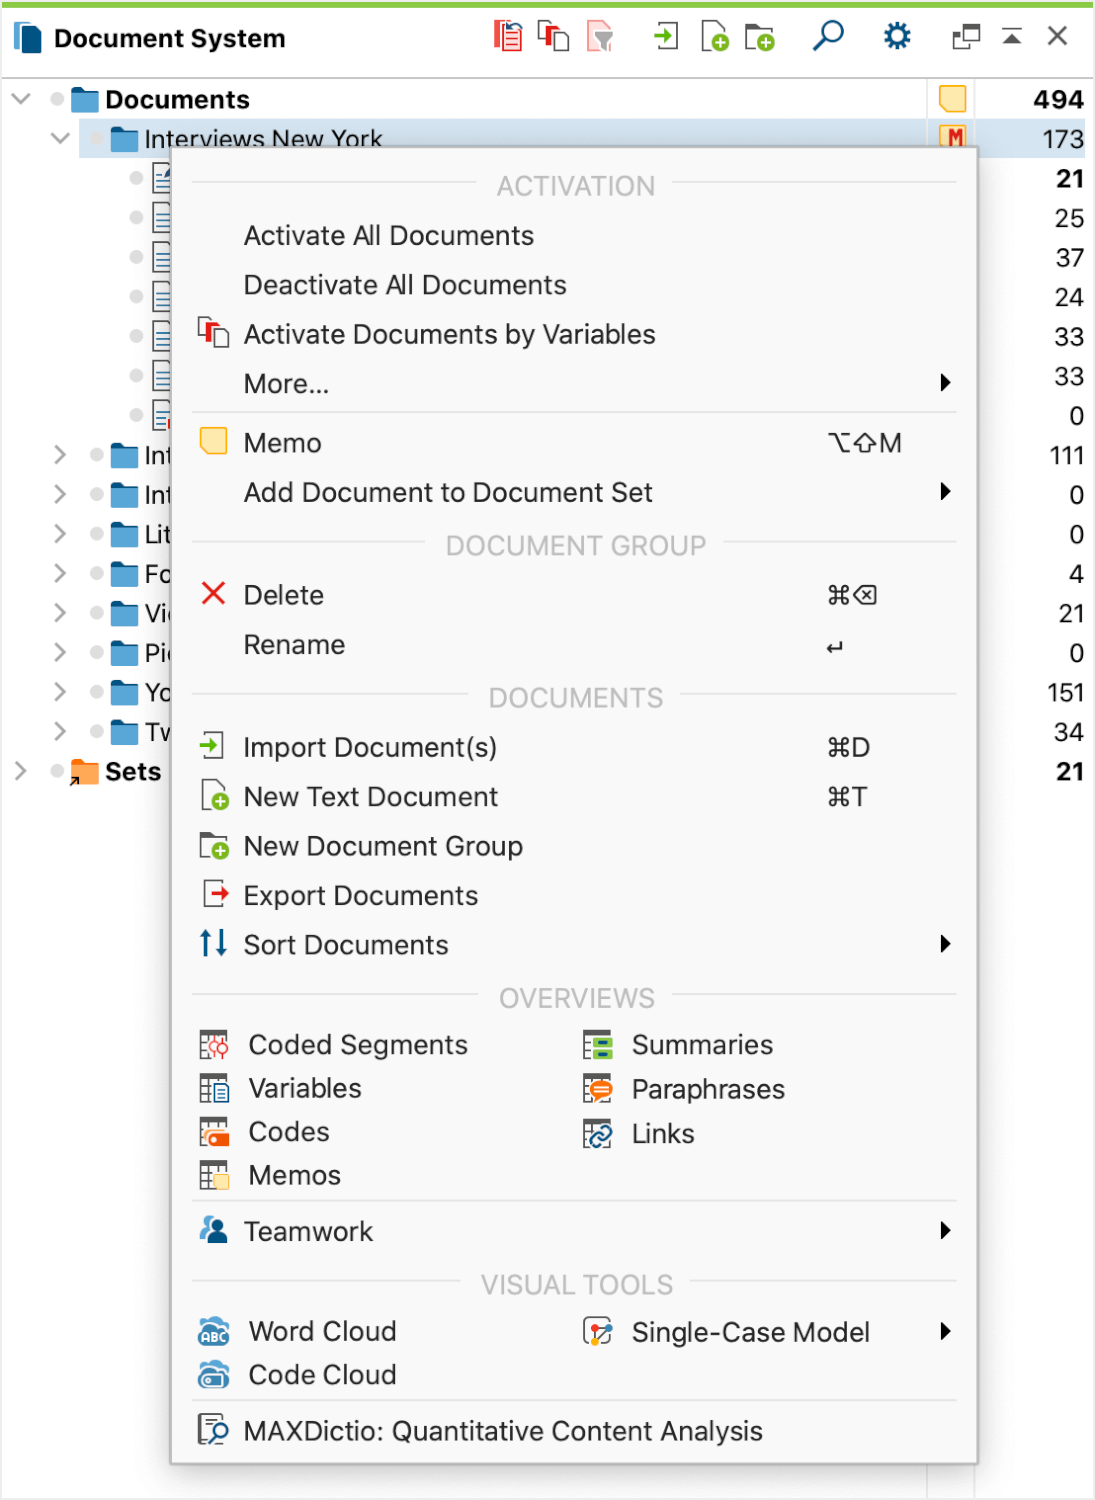 Context menu for the middle (document group) level in the Document System